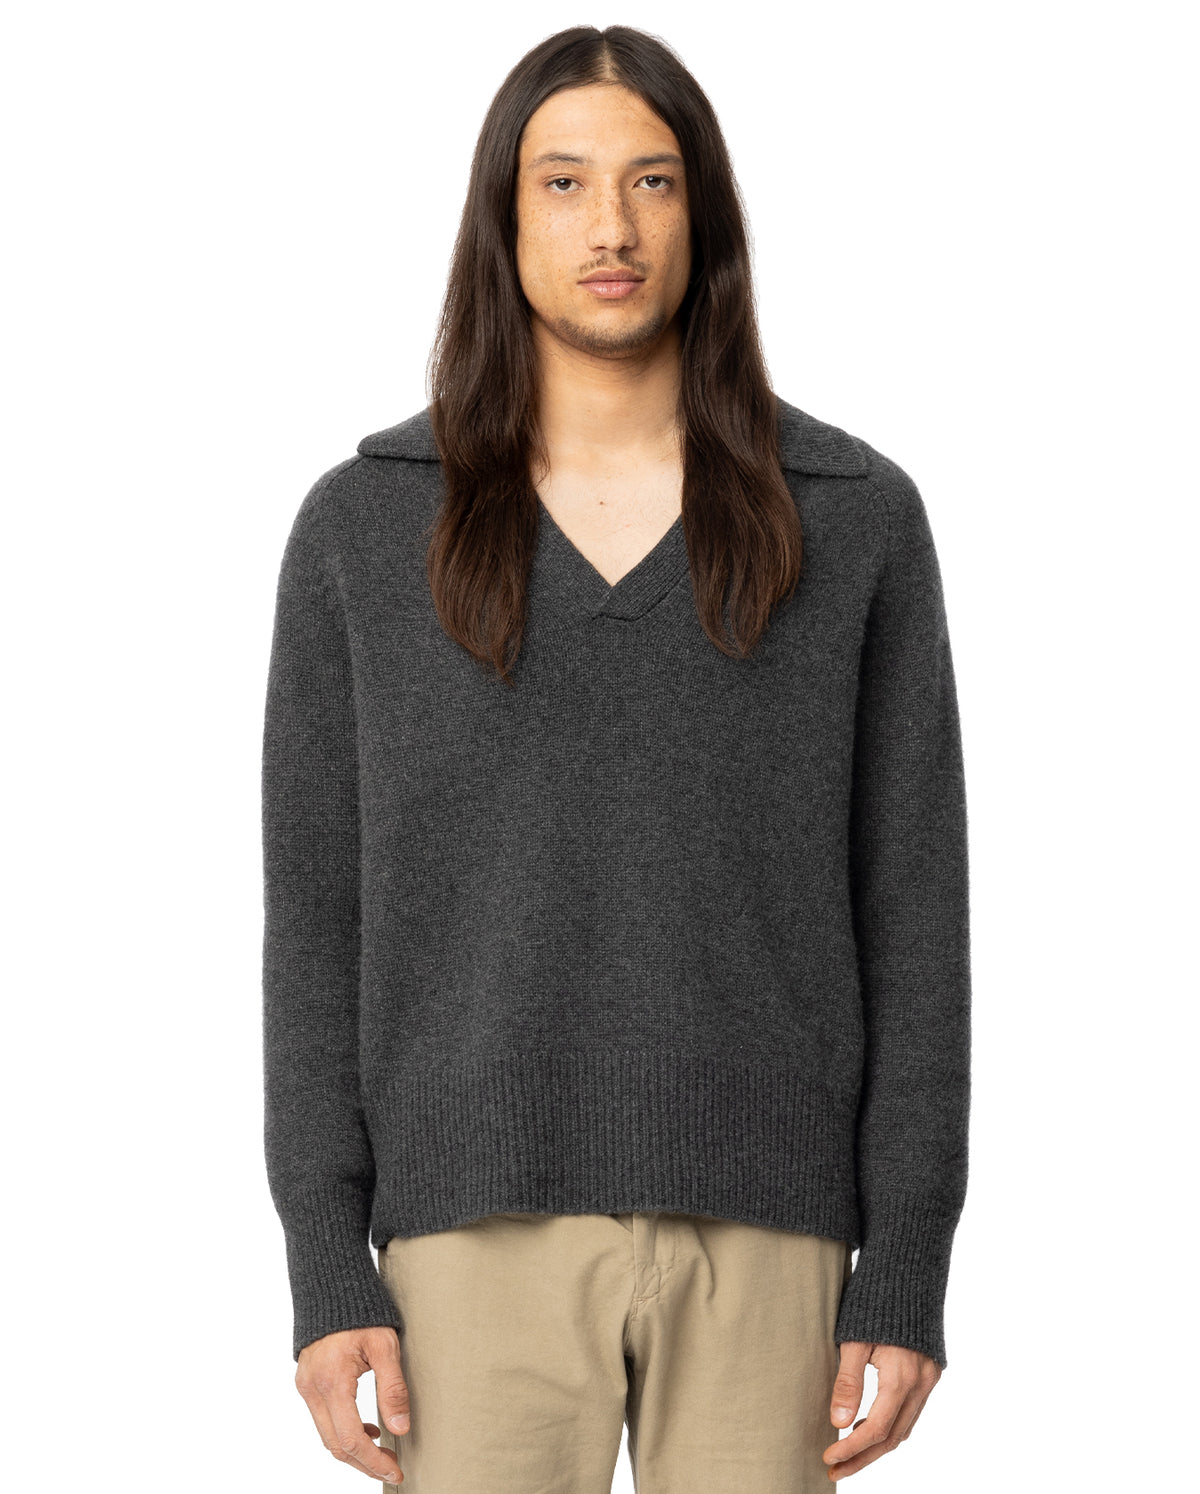 Mr Clifton Gate V-Neck Sweater - Charcoal